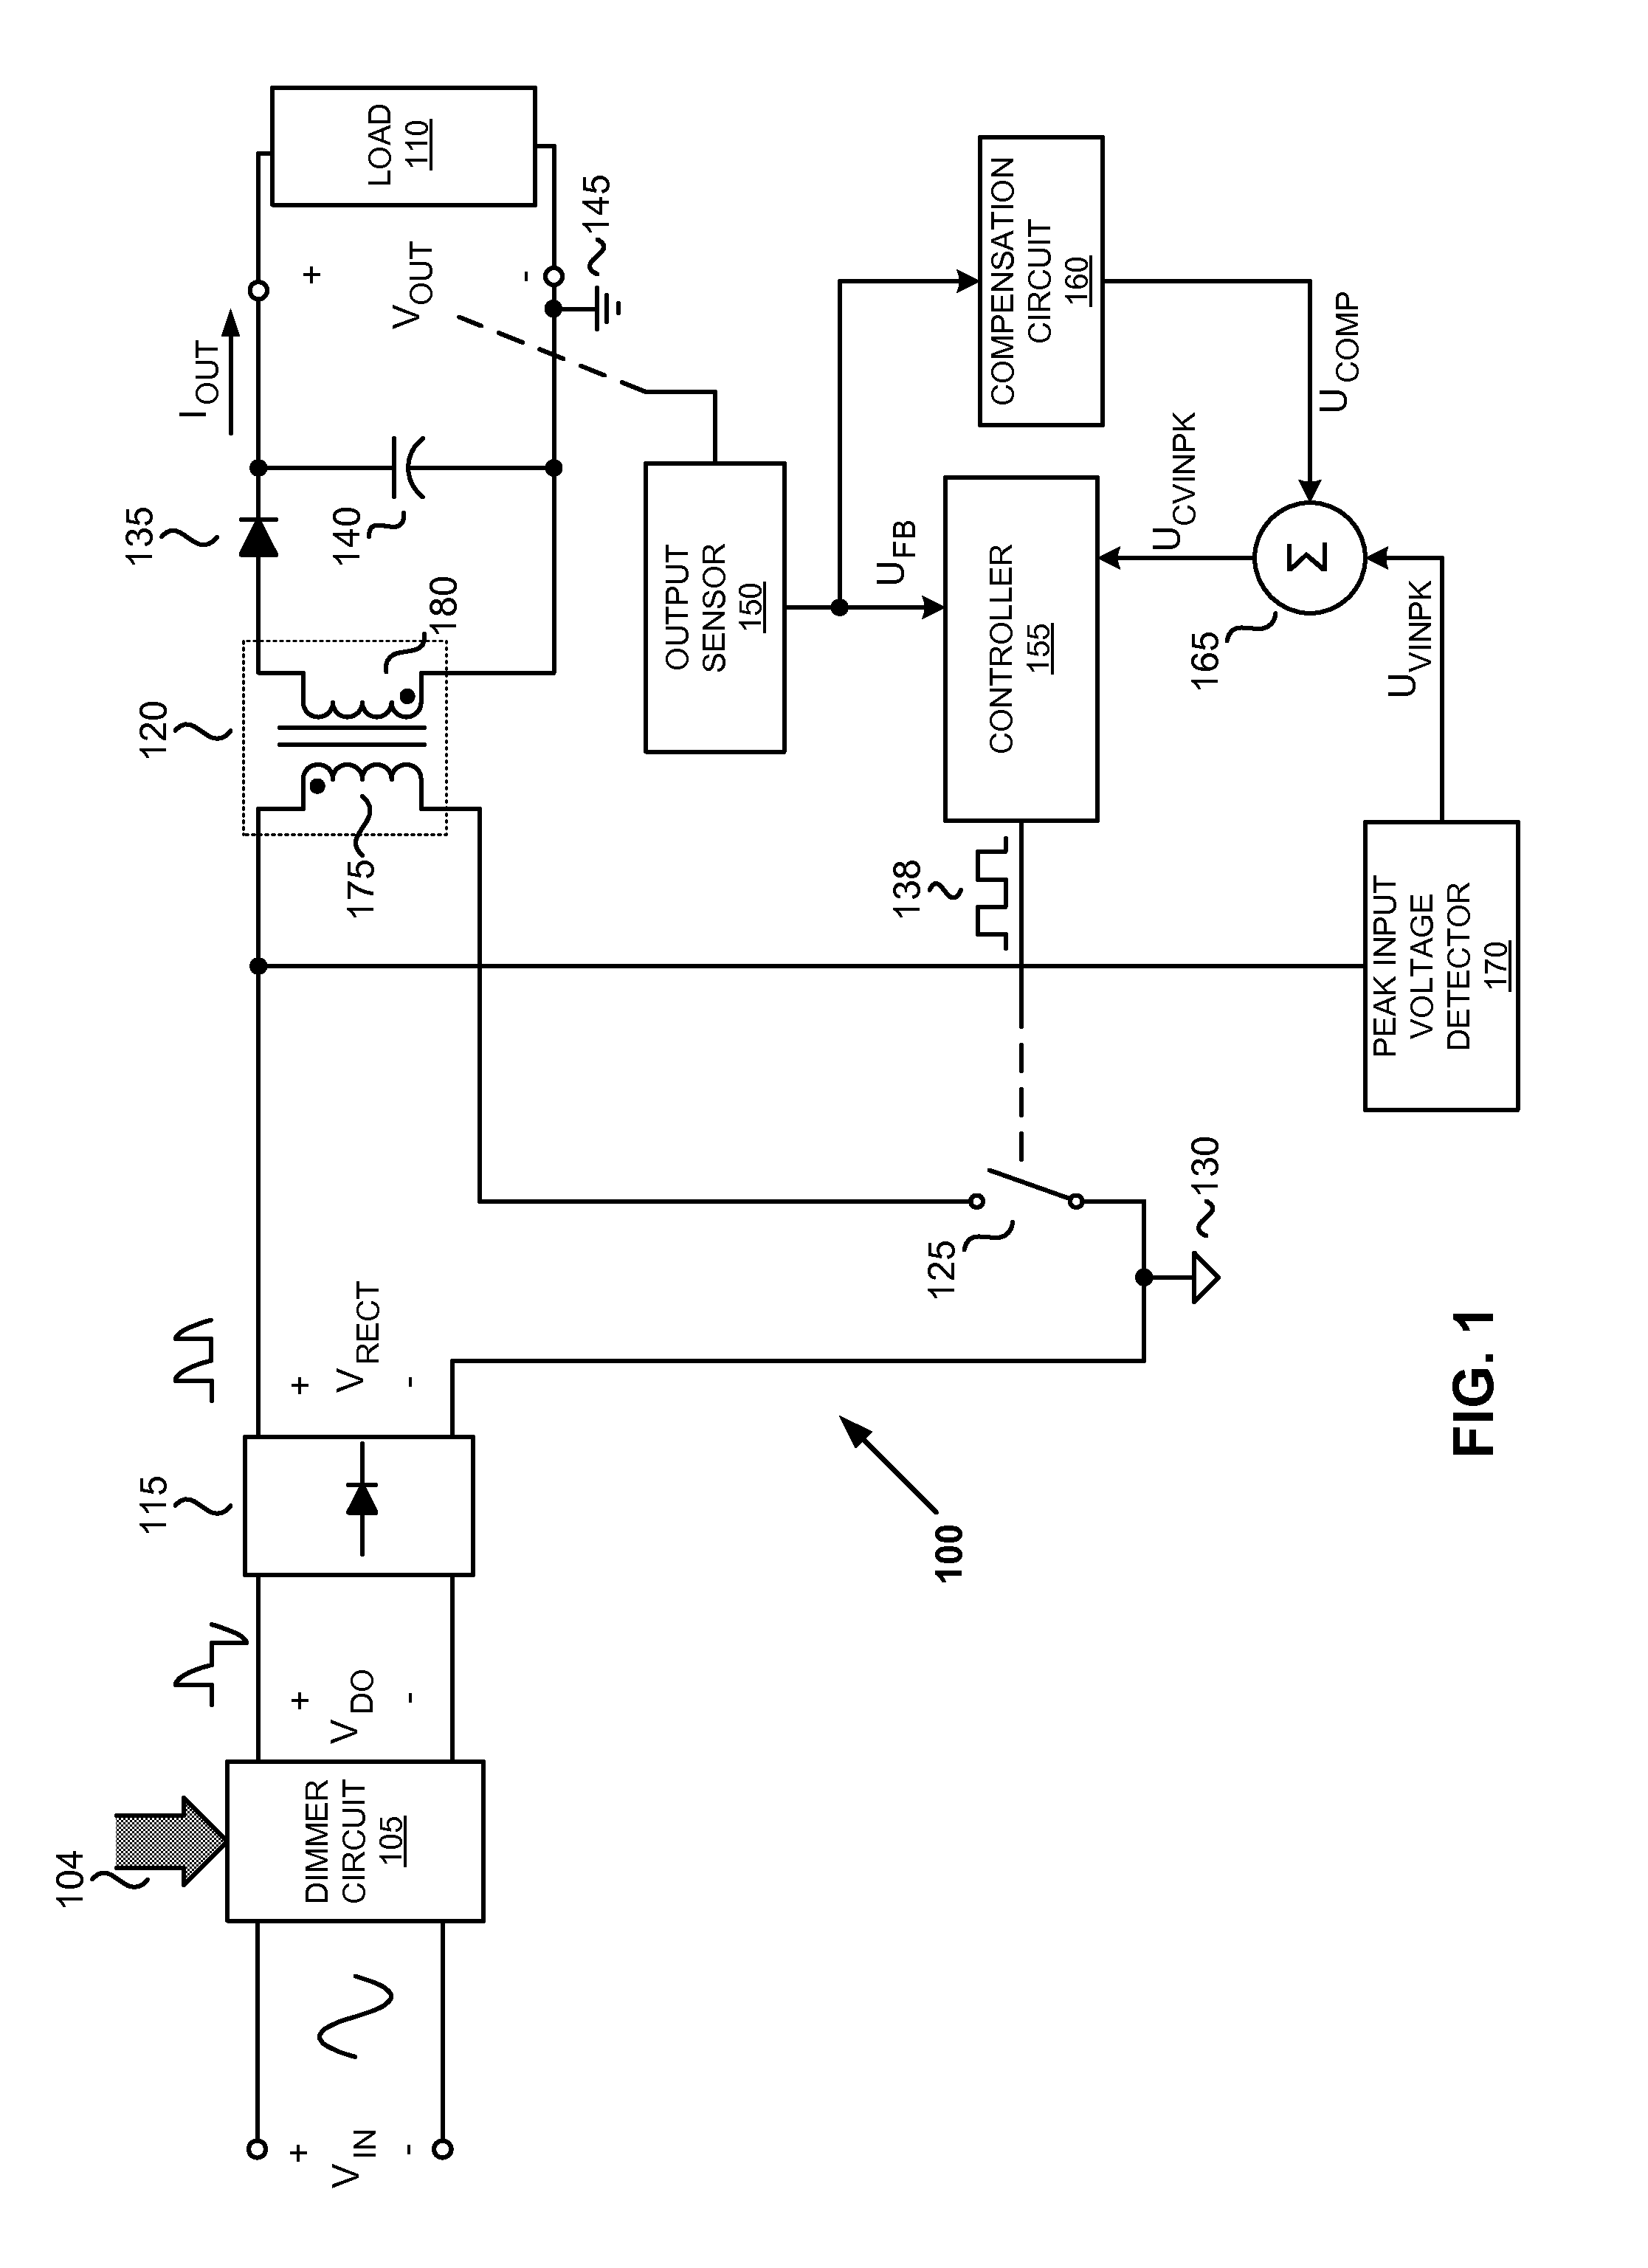 Power converter with compensation circuit for adjusting output current provided to a constant load